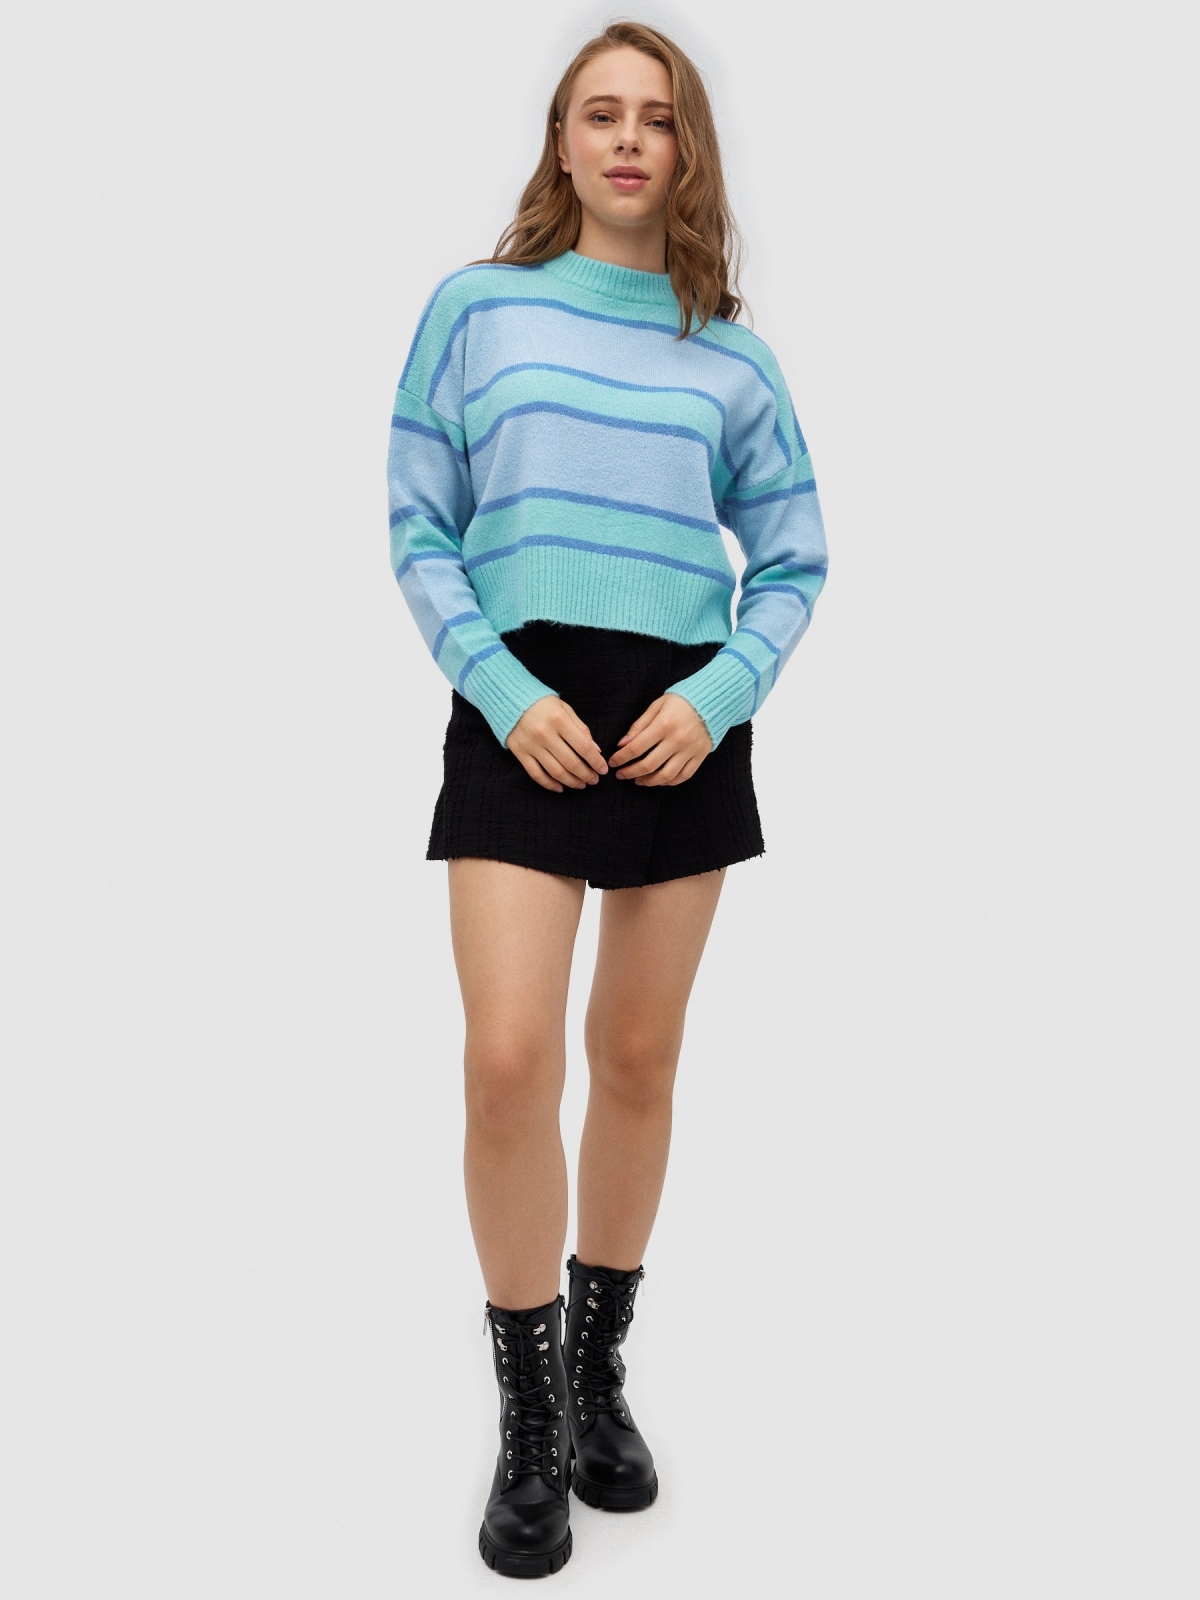 Oversized striped sweater light blue front view